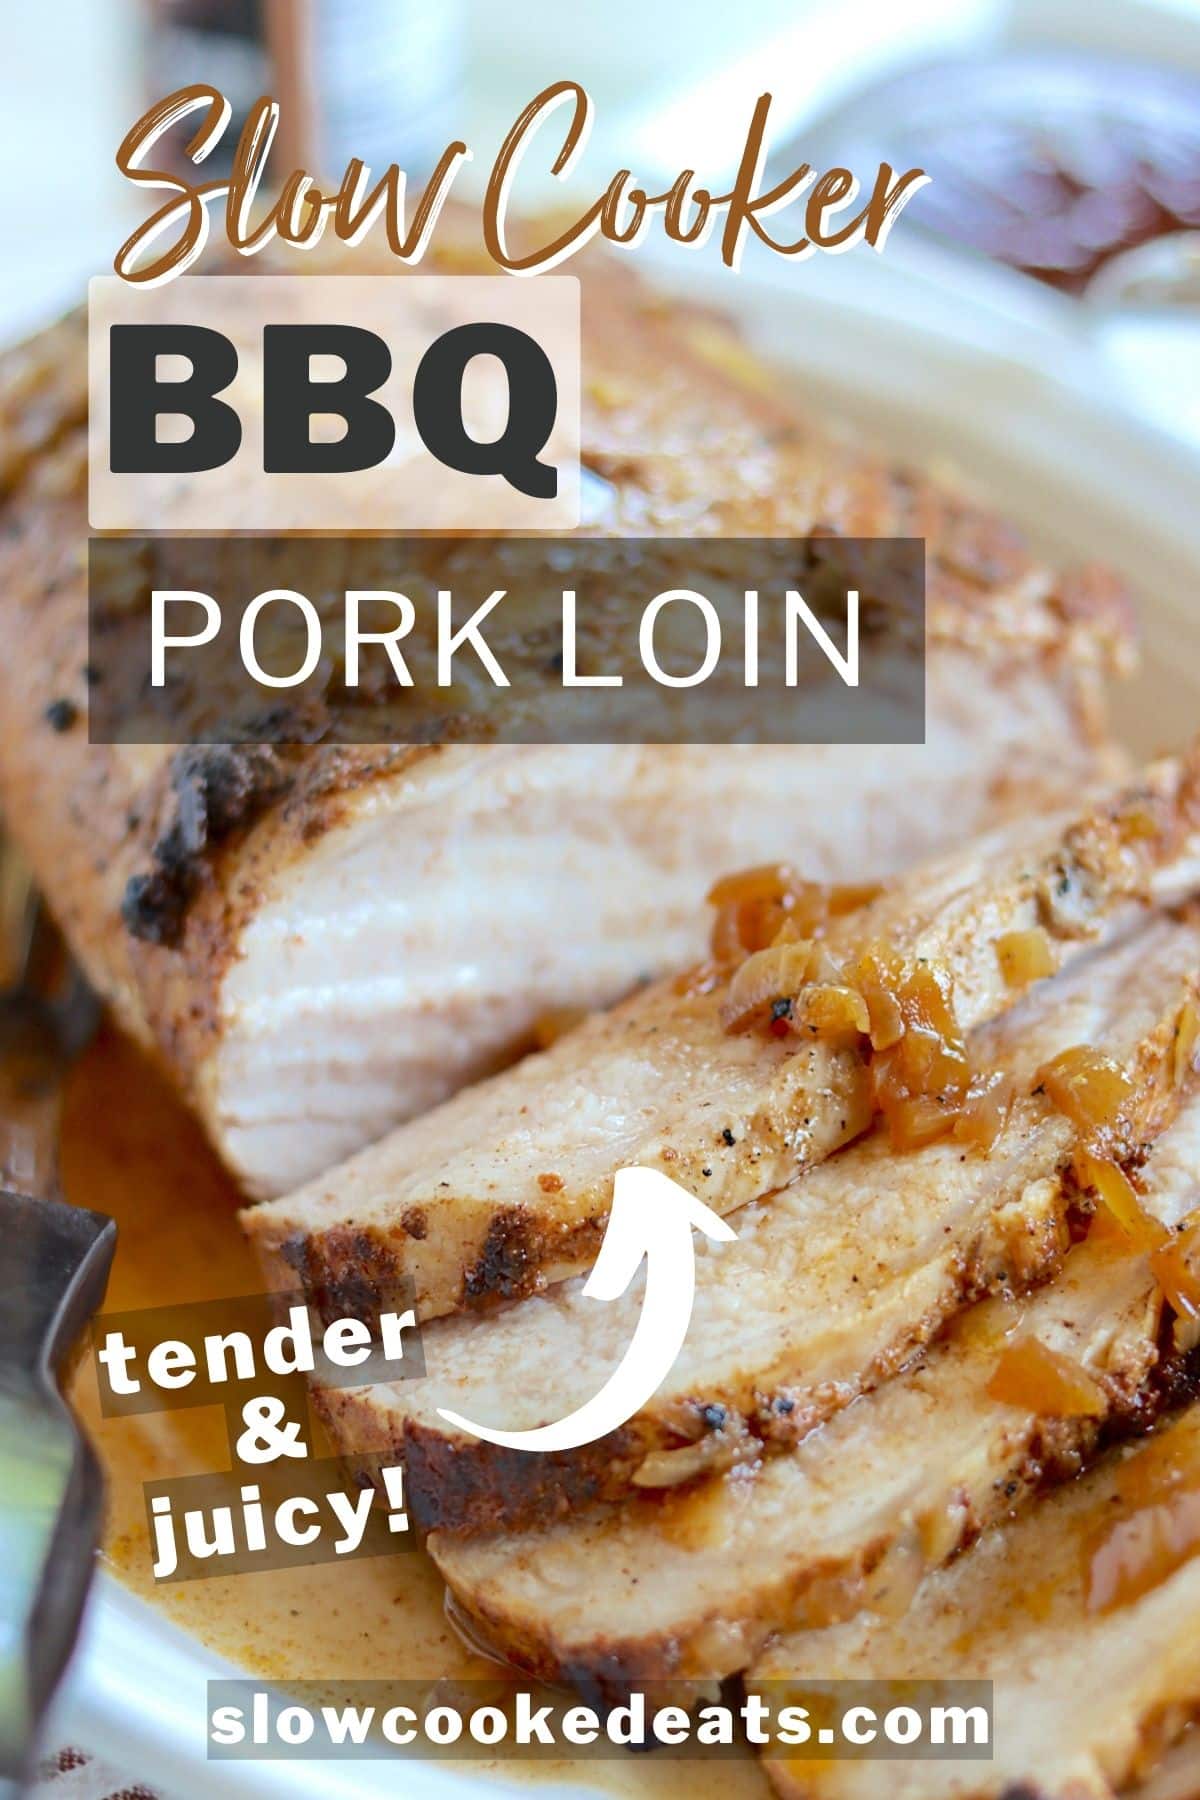 Pinterest pin with slices of juicy pork loin with BBQ seasoning.